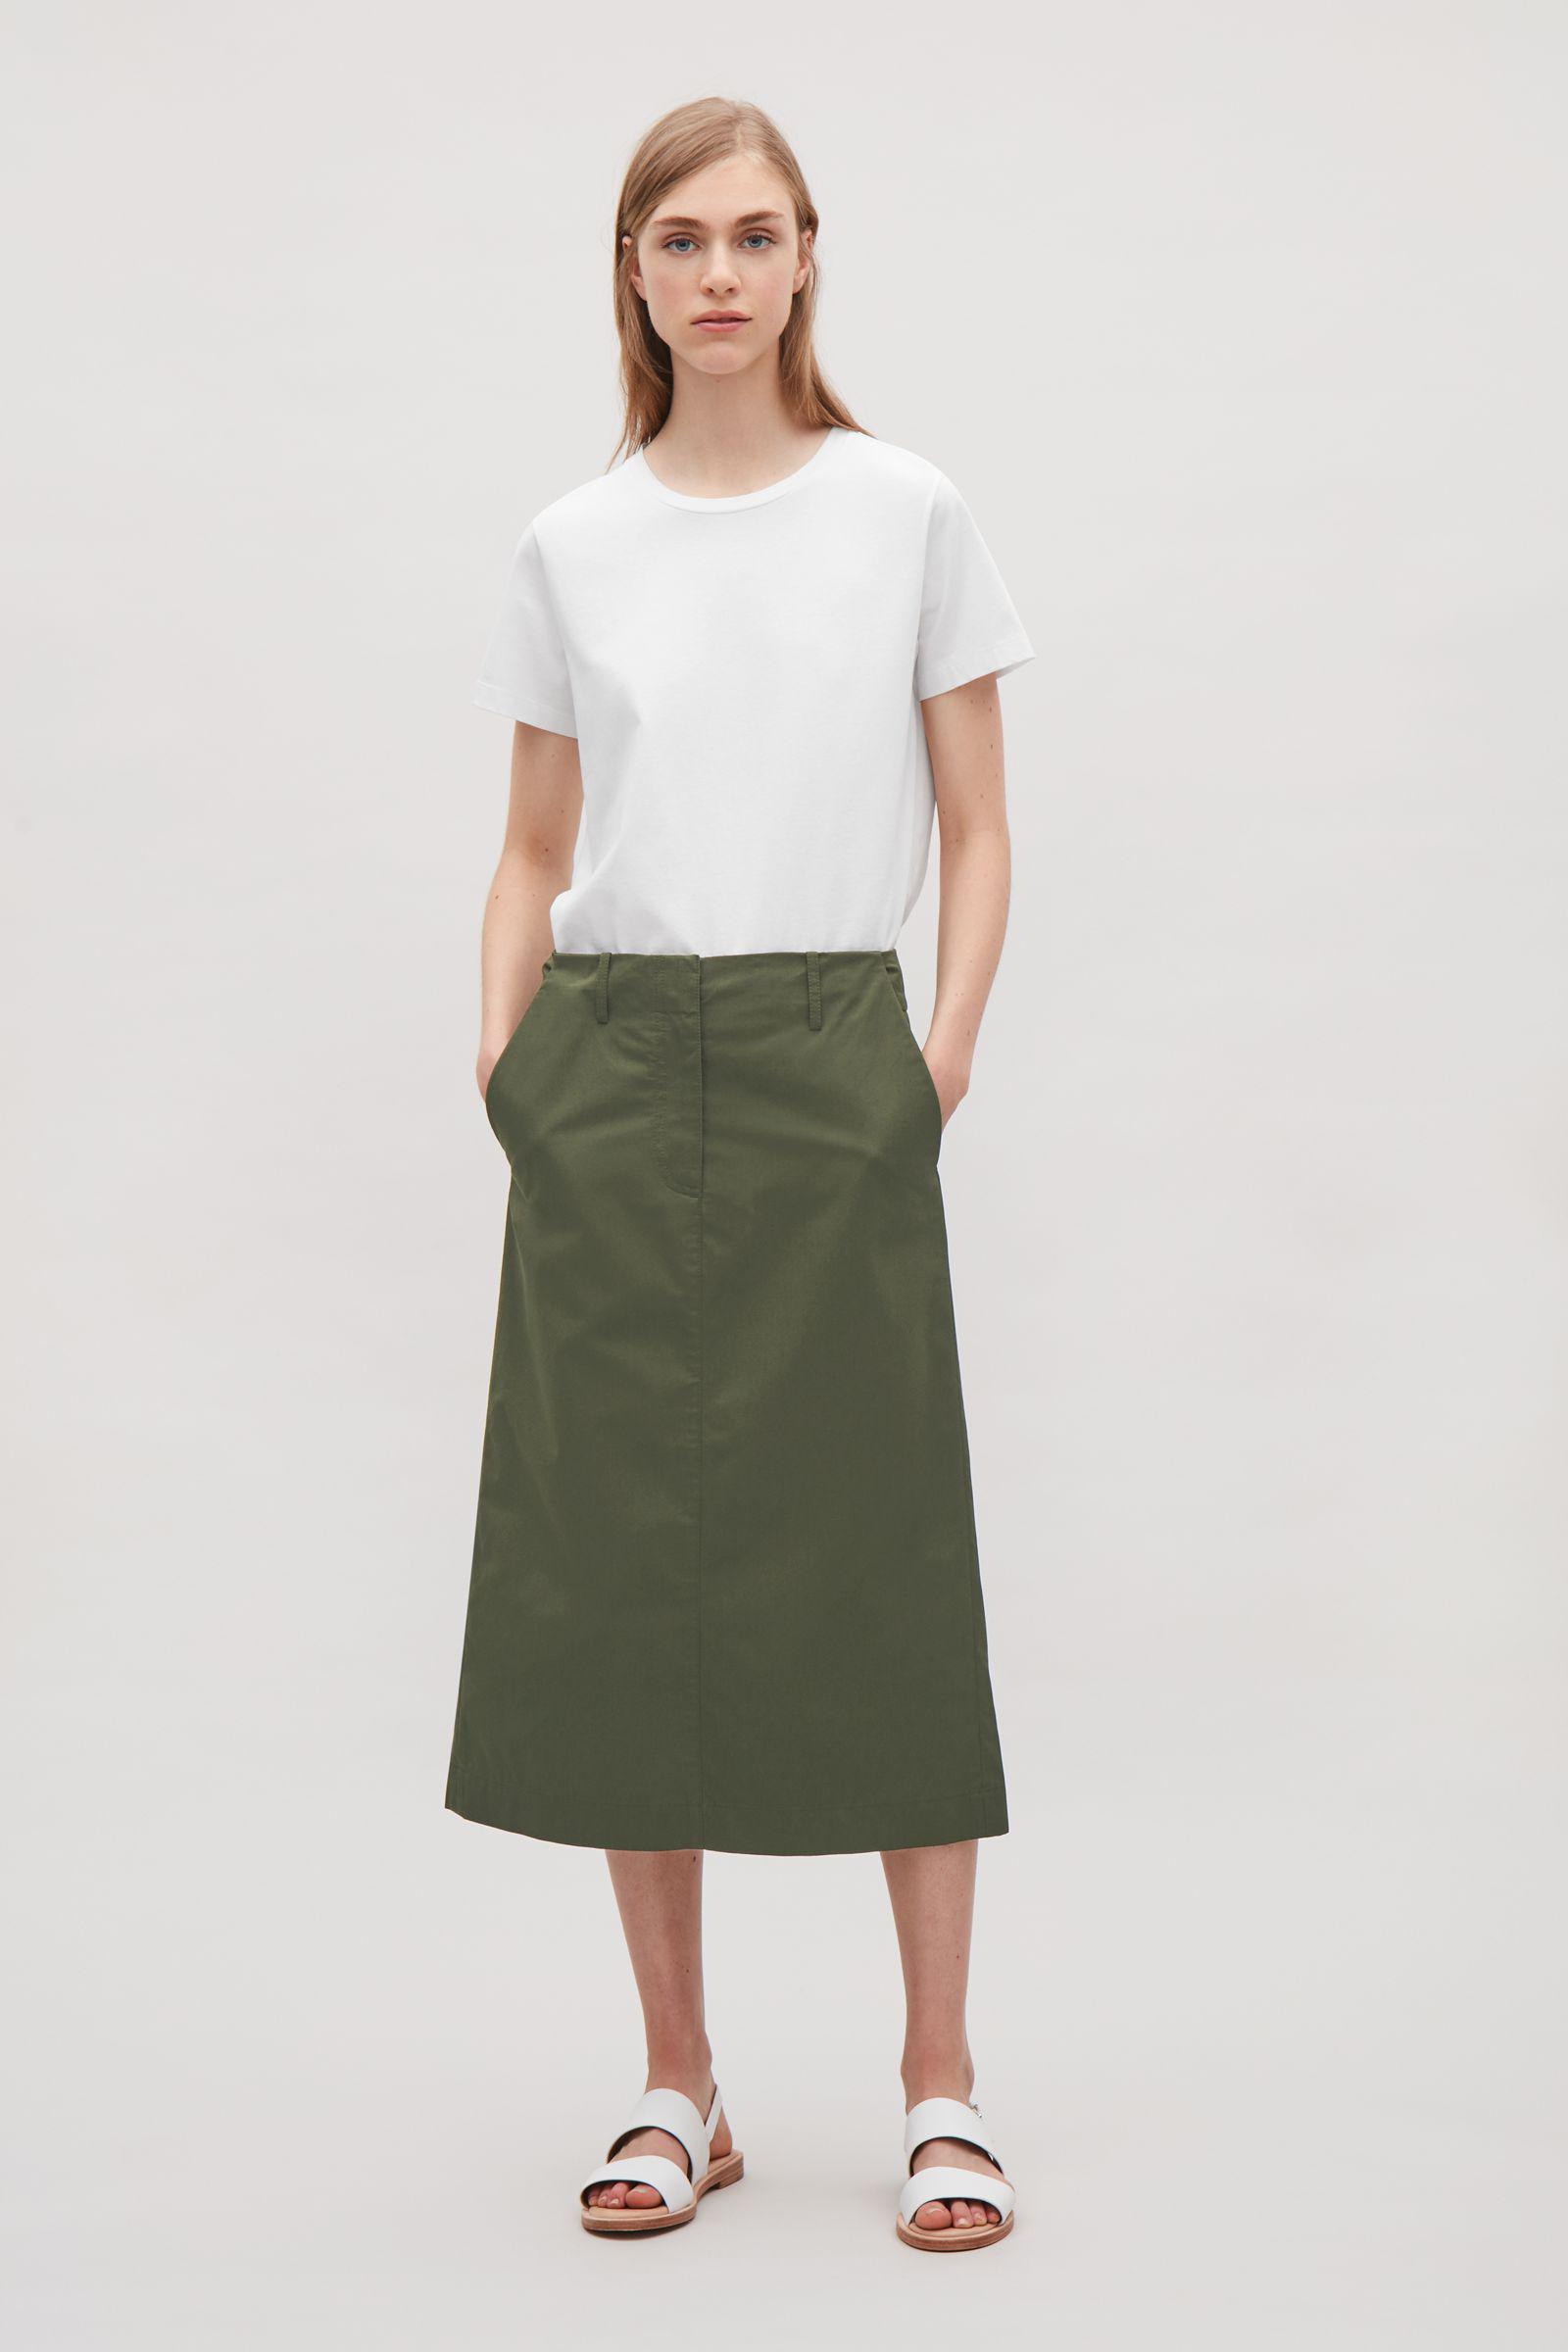 COS Cotton A-line Skirt in Olive Green (Green) - Lyst